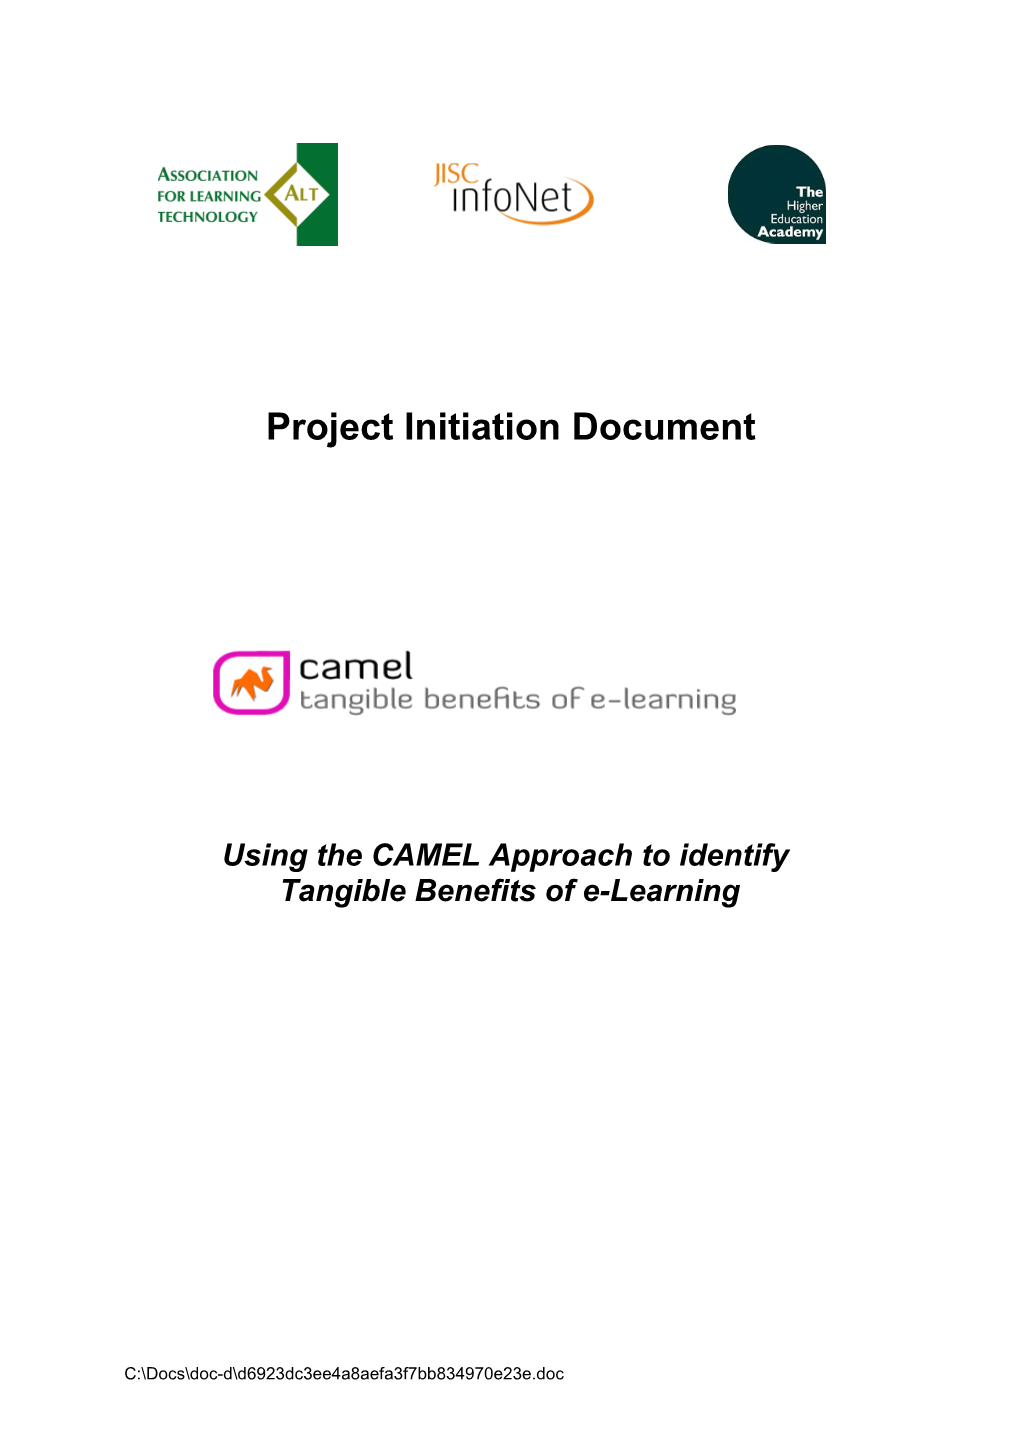 Tangible Benefits of E-Learning (CAMEL)